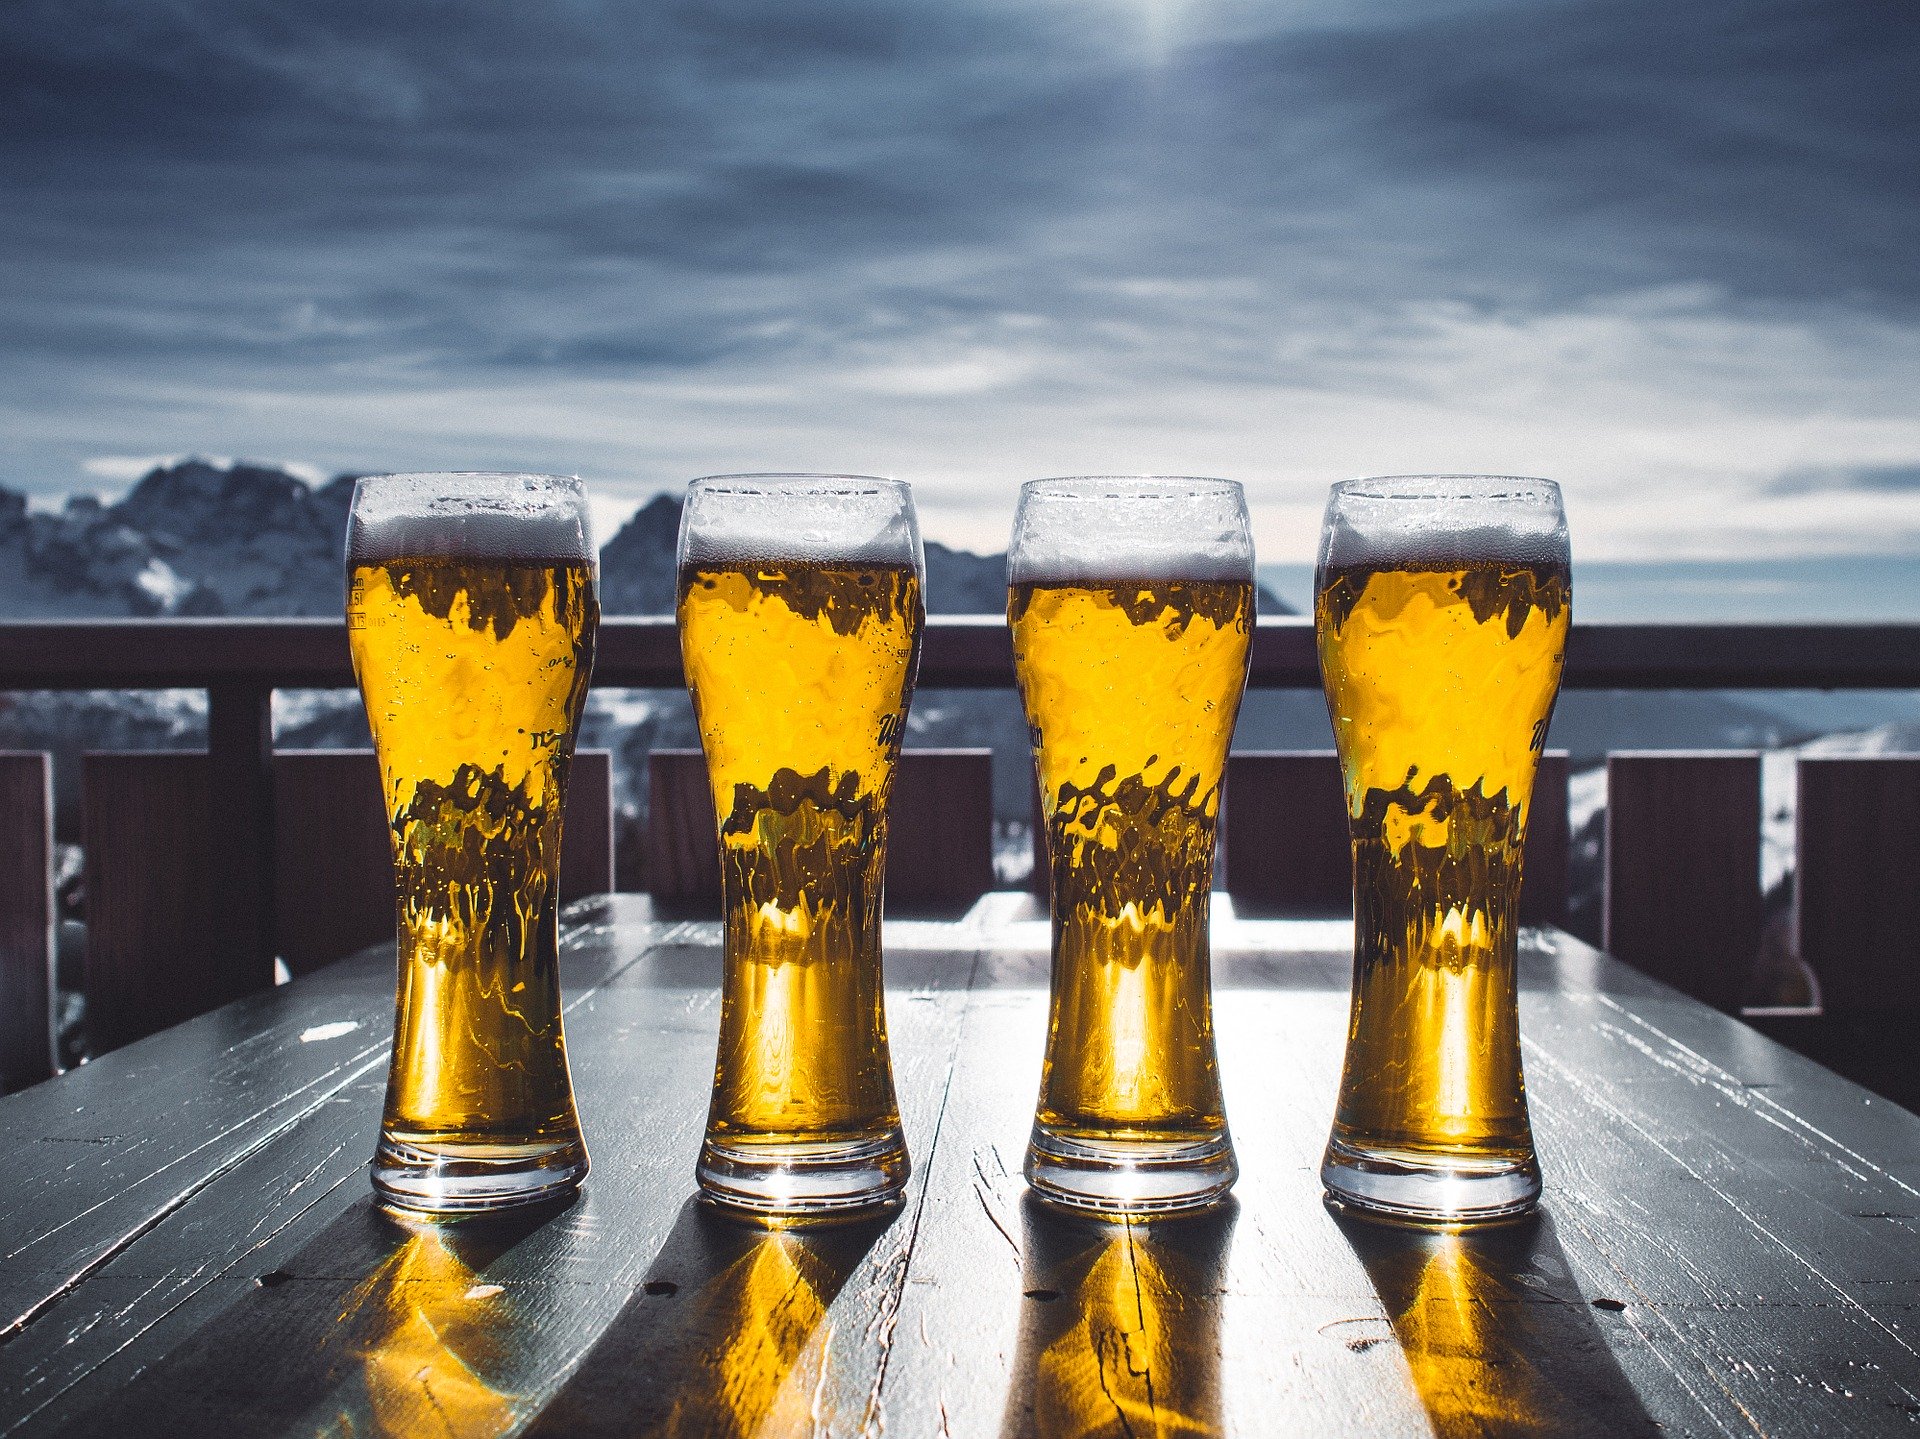 most-popular-types-of-beer-in-bavaria-germany-oneworld2travelers